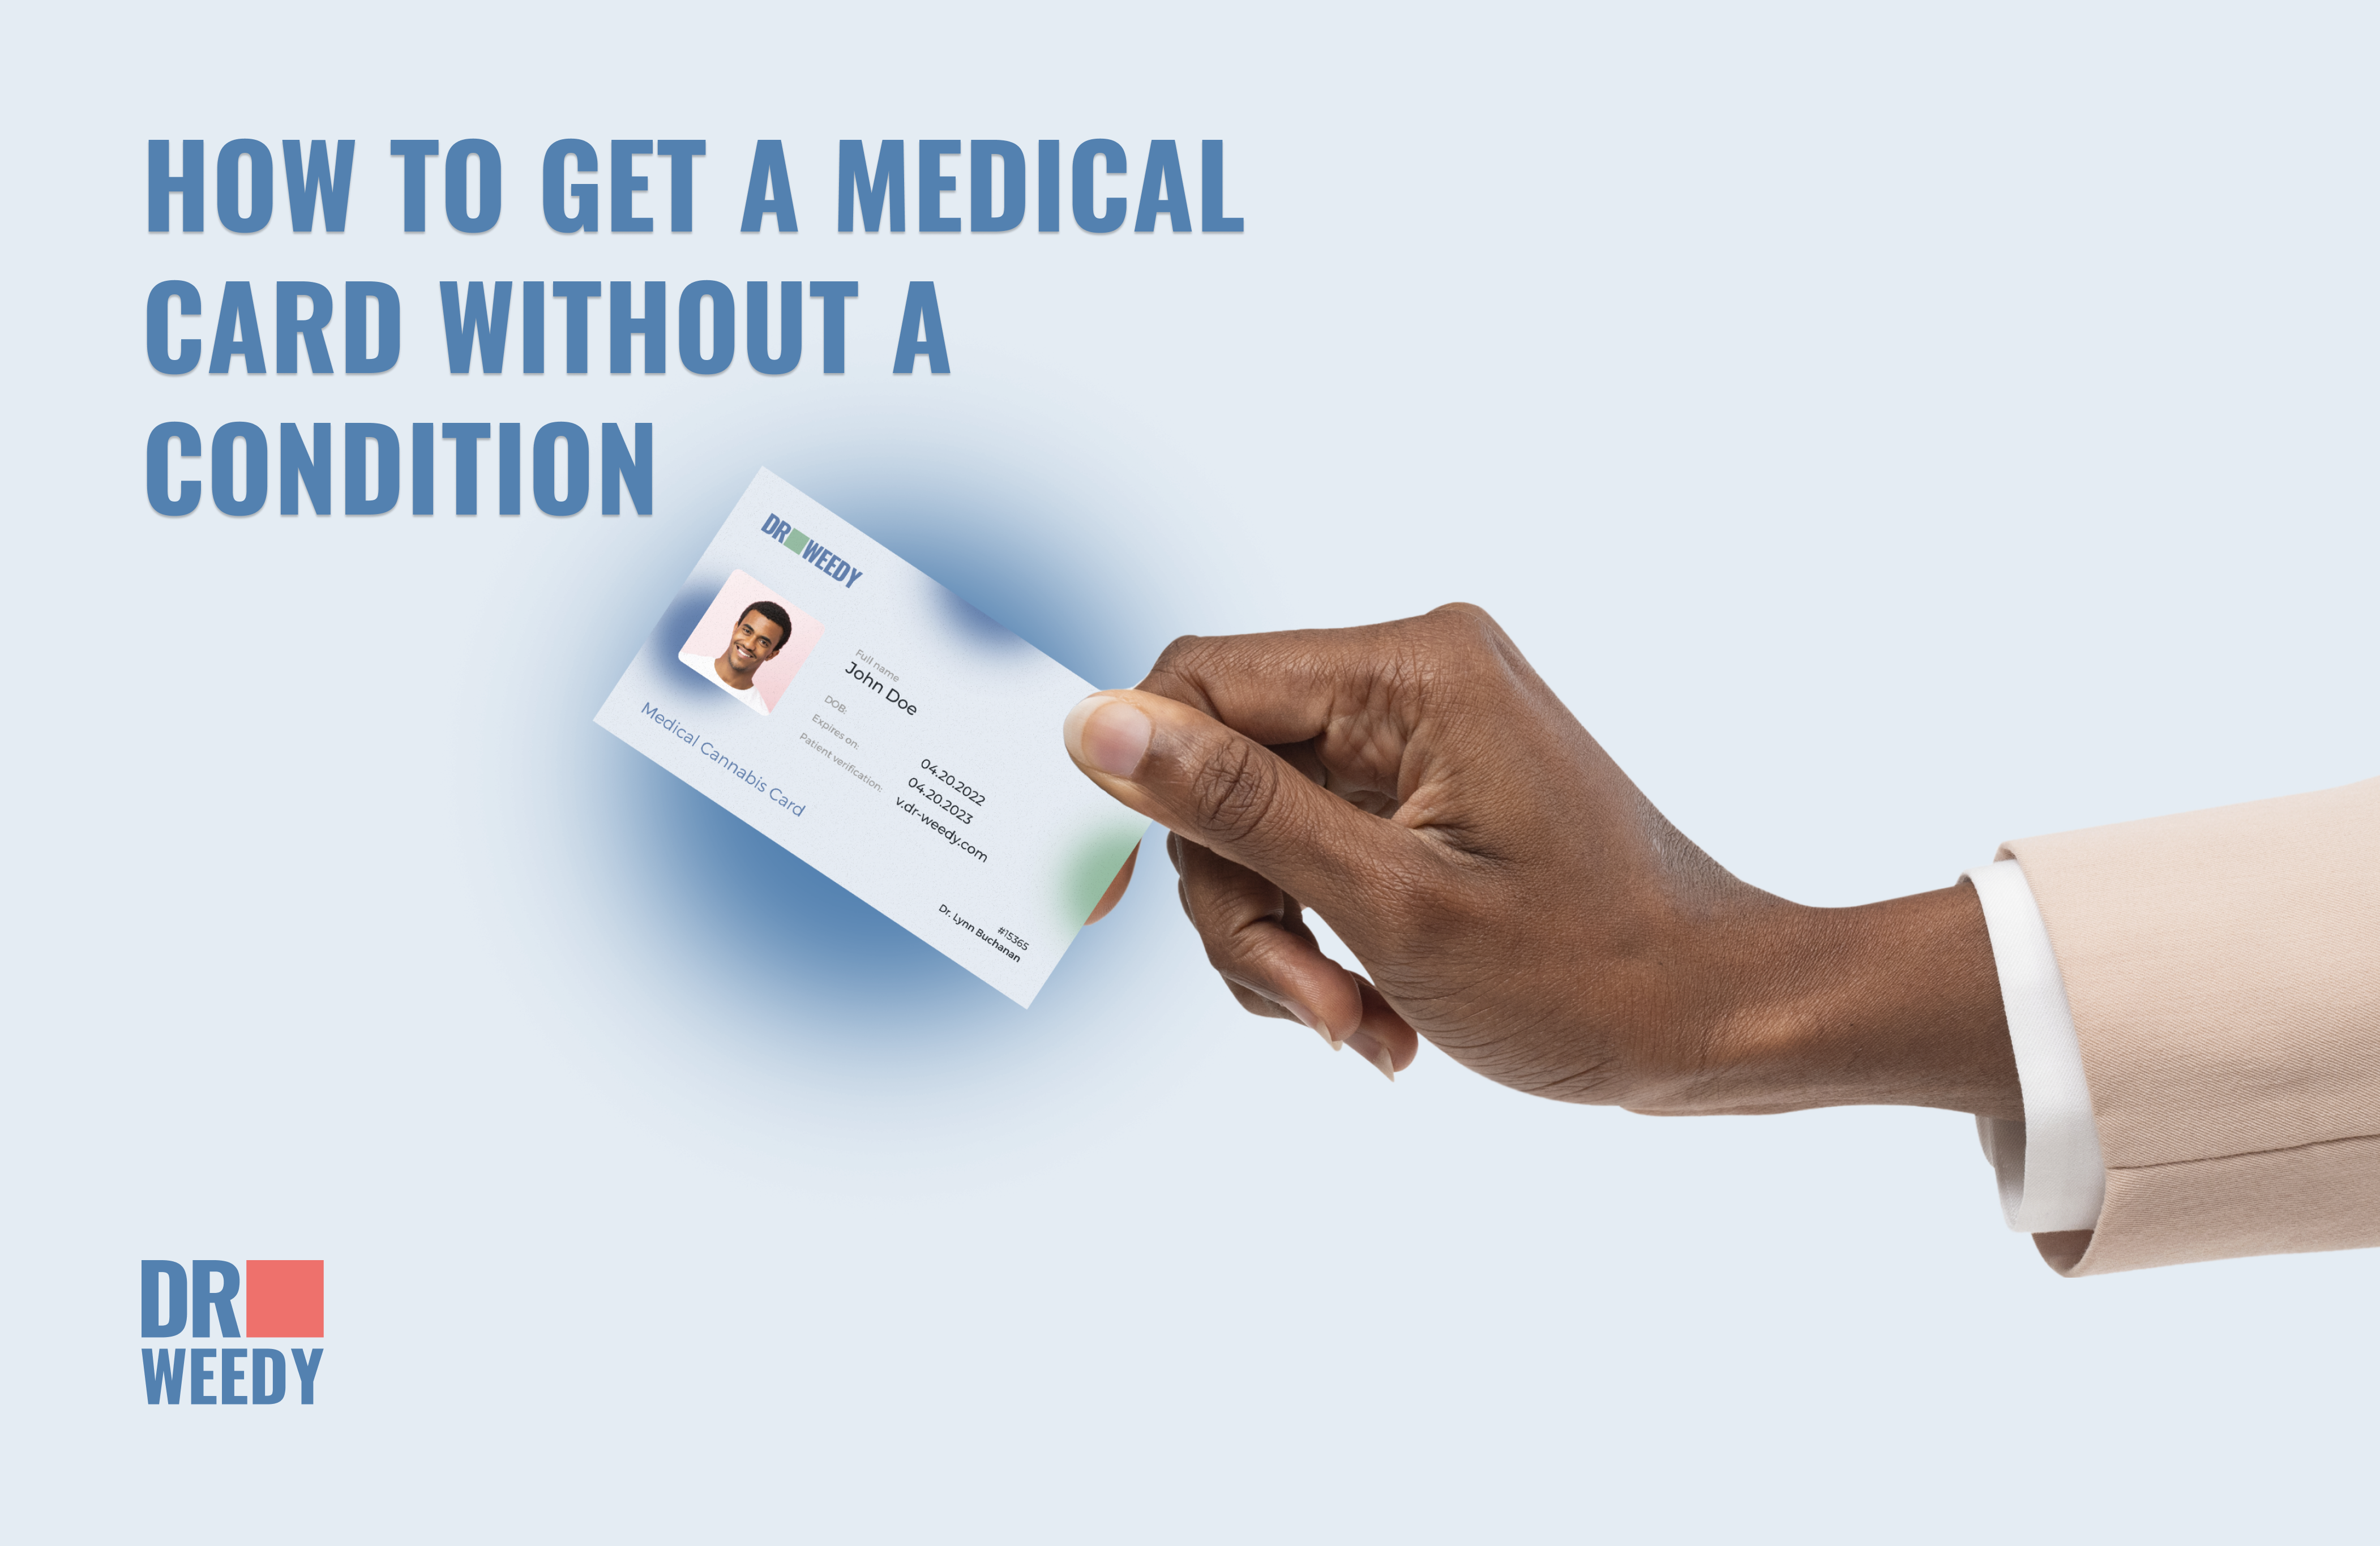 How to Get a Medical Card Without a Condition in 2023